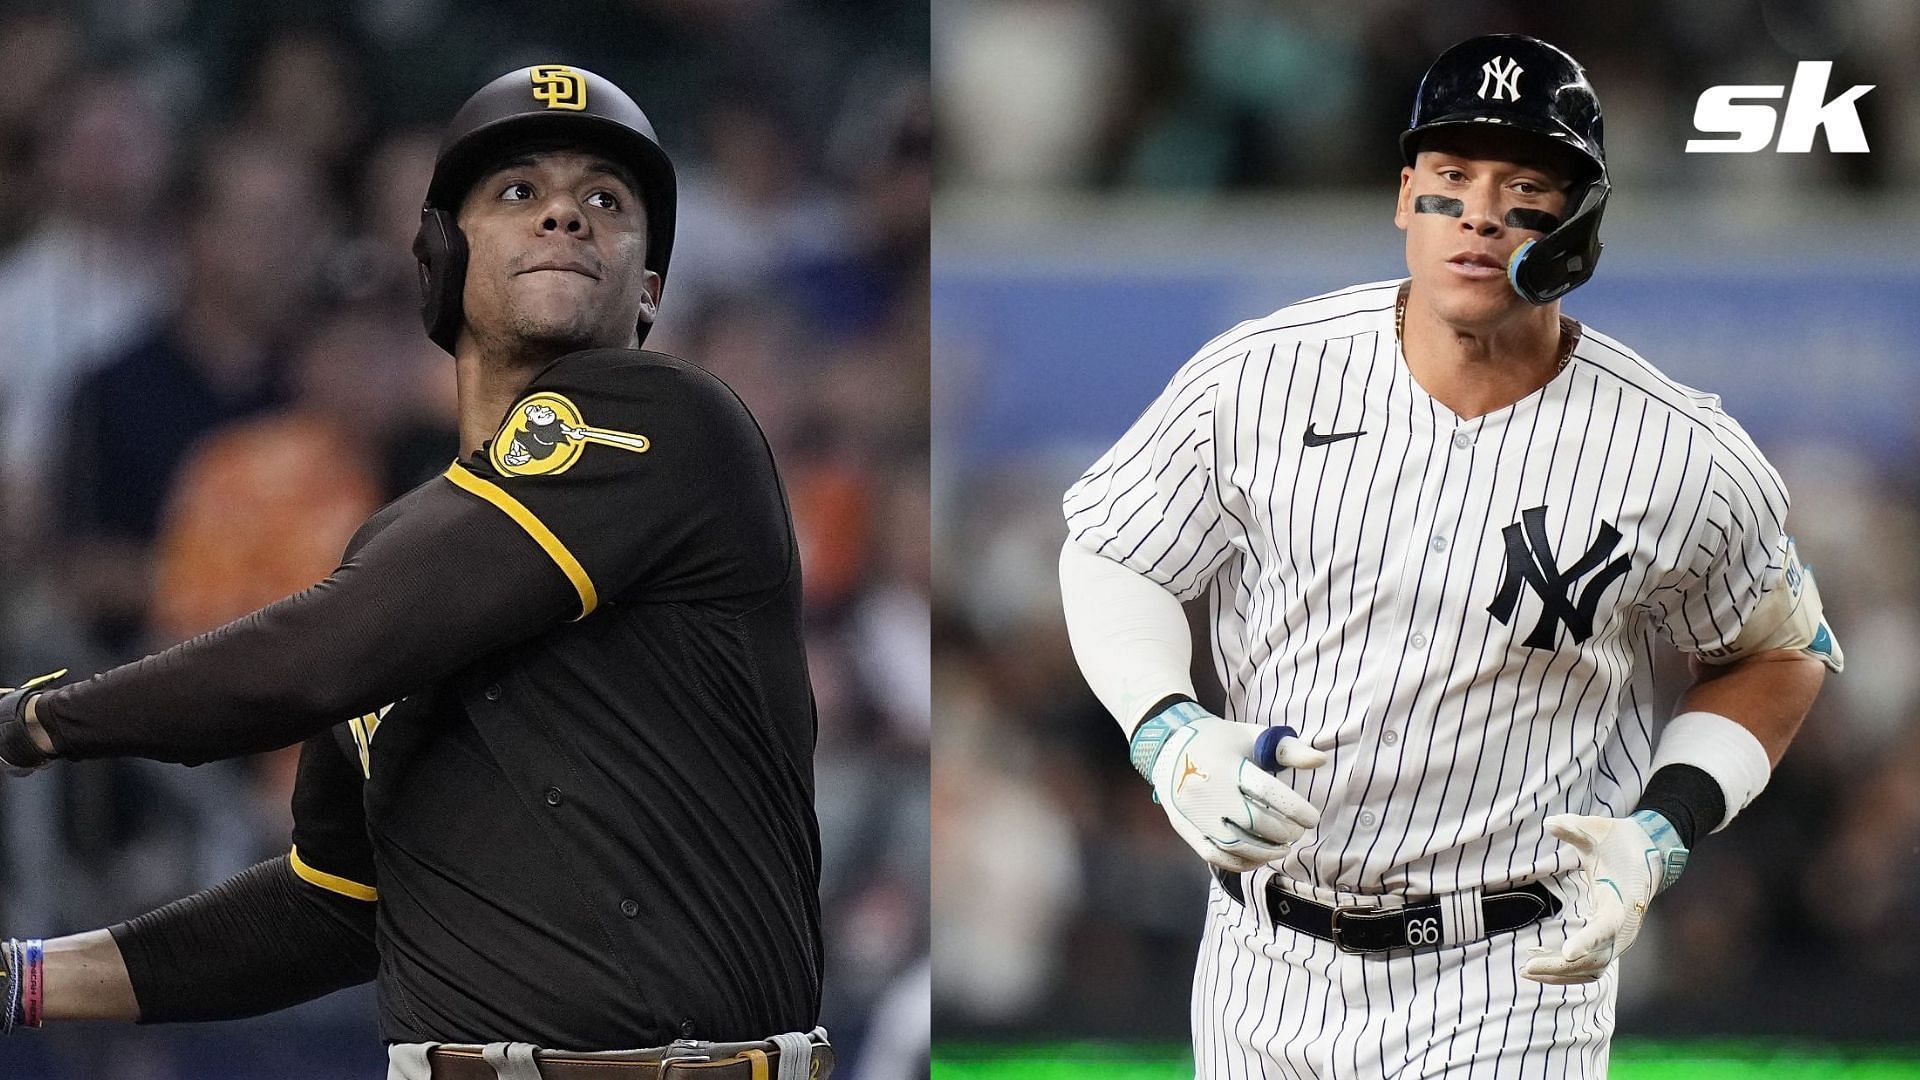 Juan Soto says he is excited to see how tall Aaron Judge and Giancarlo Stanton are at New York Yankees camp